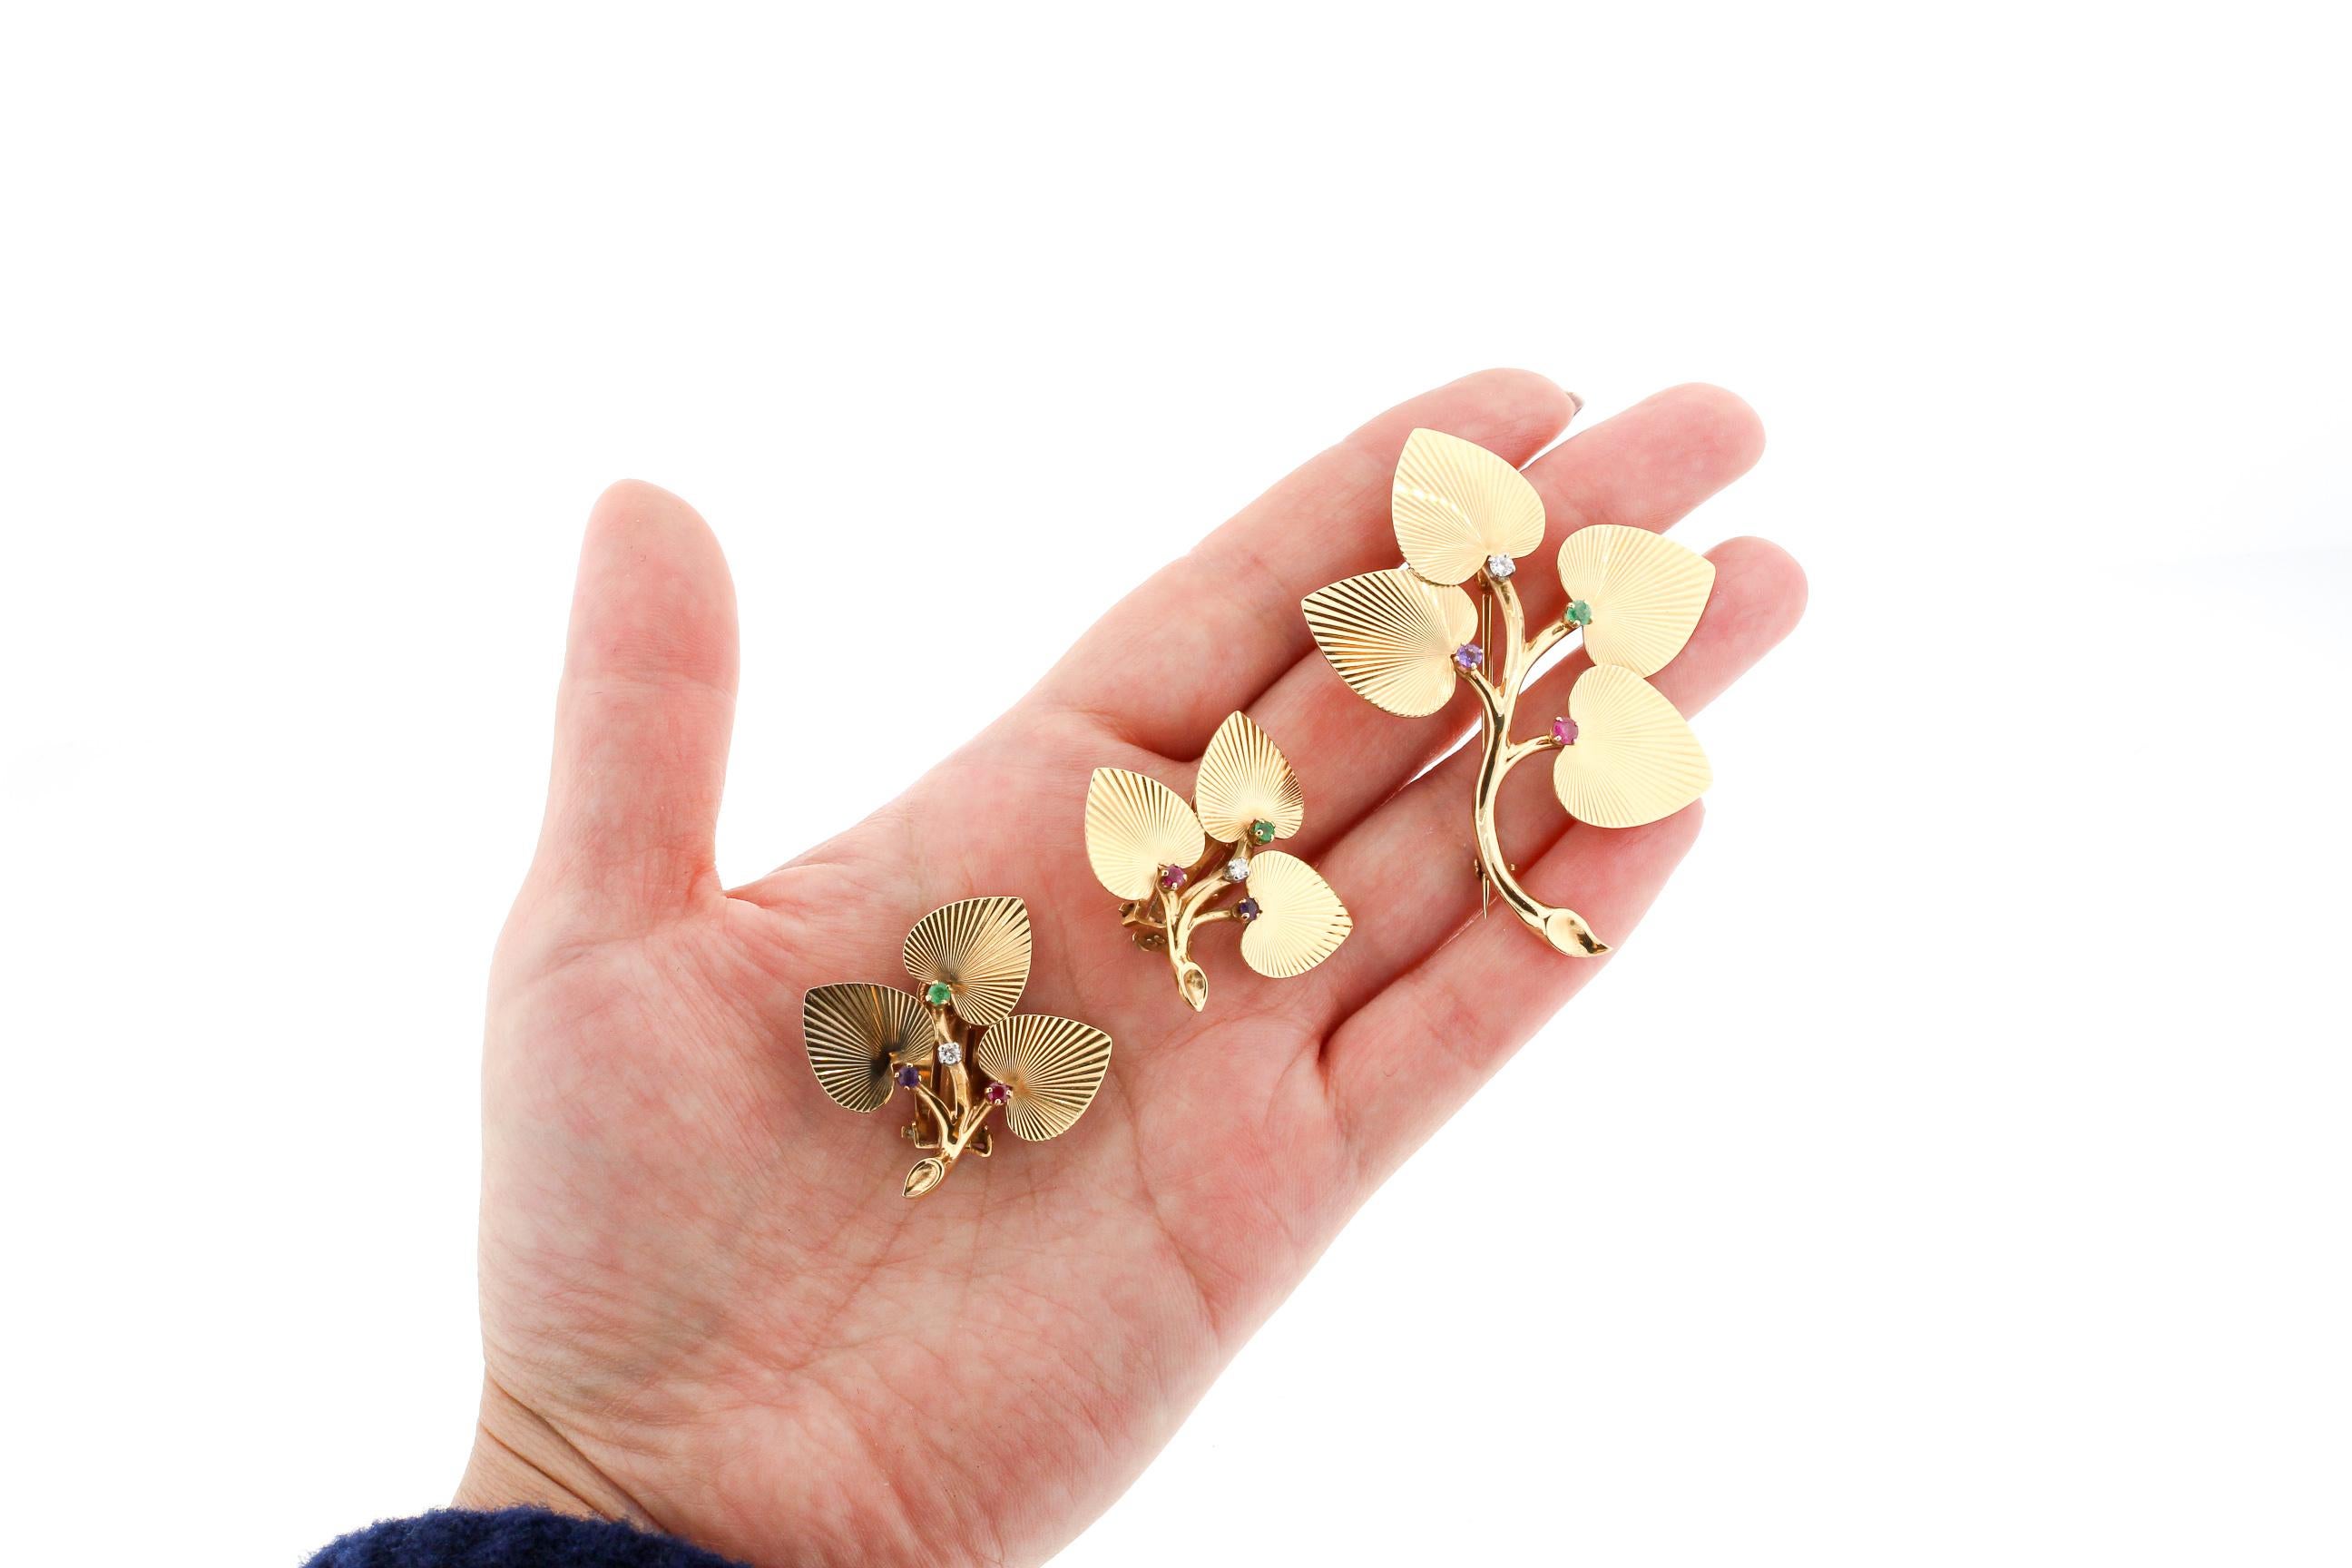 A lovely Retro set of 14k gold leaf earrings with matching pin made by Tiffany & Co. around the 1940s. The textured heart shaped leaves make a cluster set with a small Diamond, Emerald, Amethyst and Emerald. Spelling DEAR. The matching pin has the